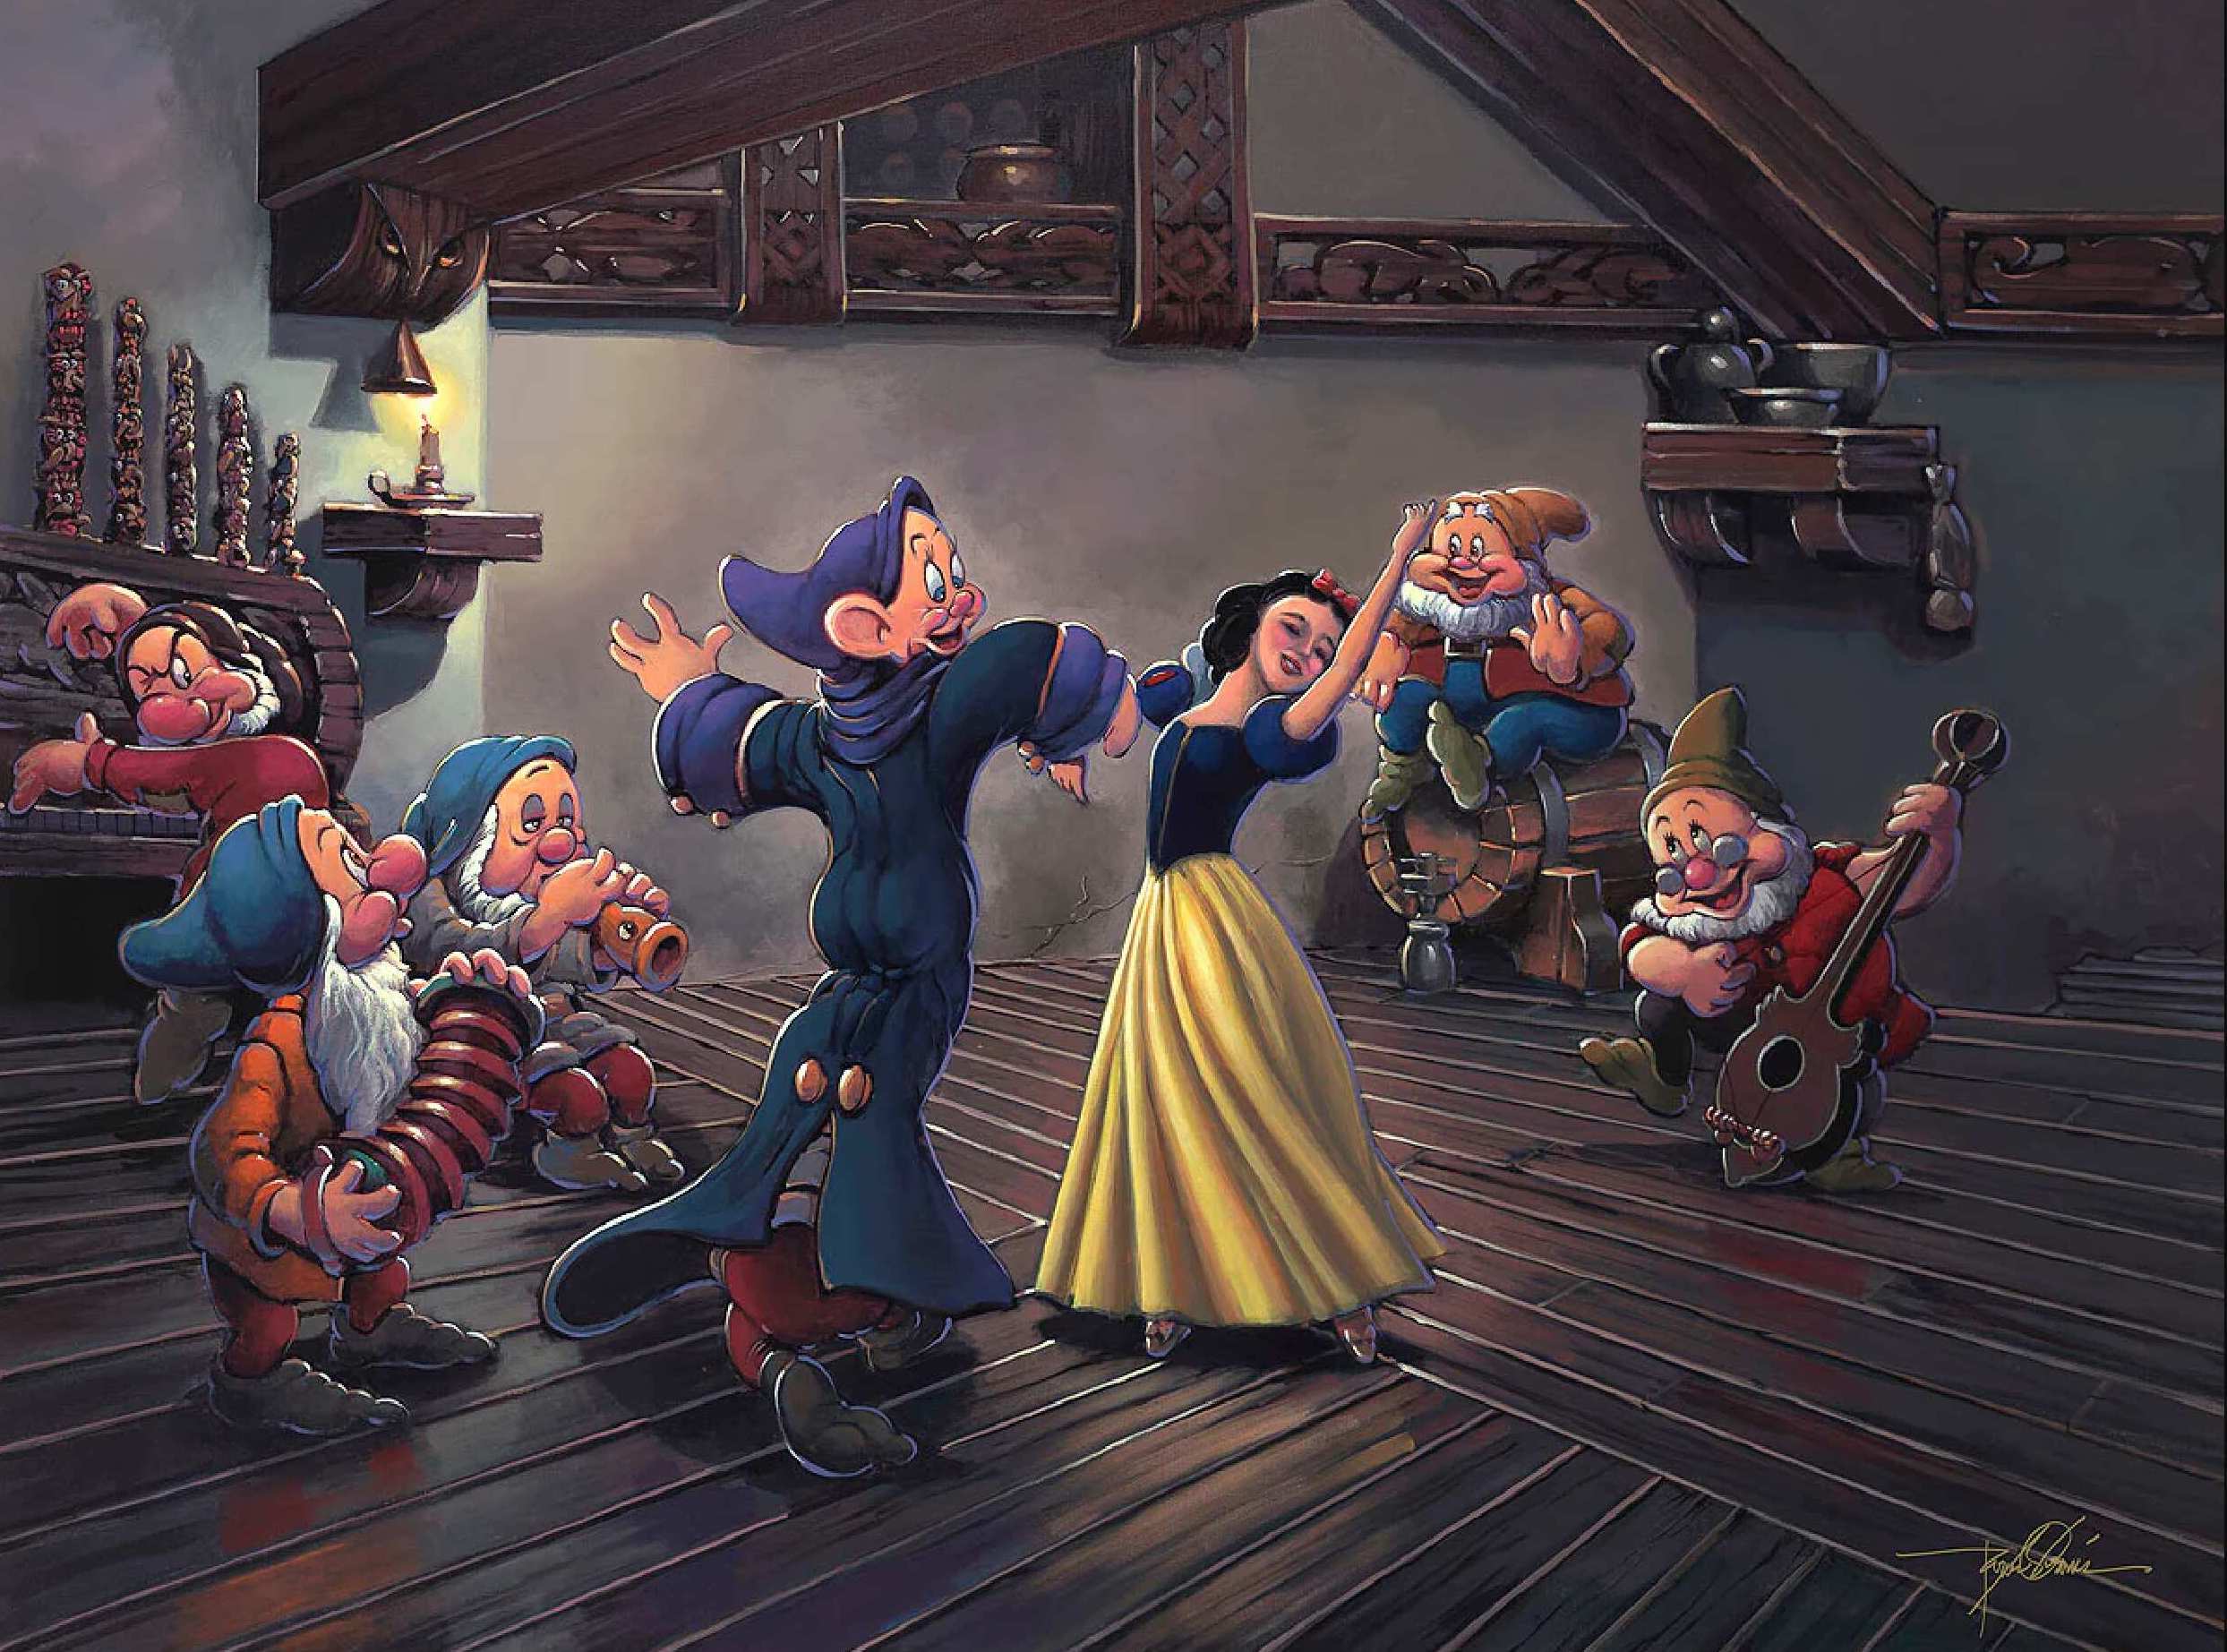 Snow White and her charming companions as they fill their cozy cottage with joy, music, and laughter as they dance around the room.